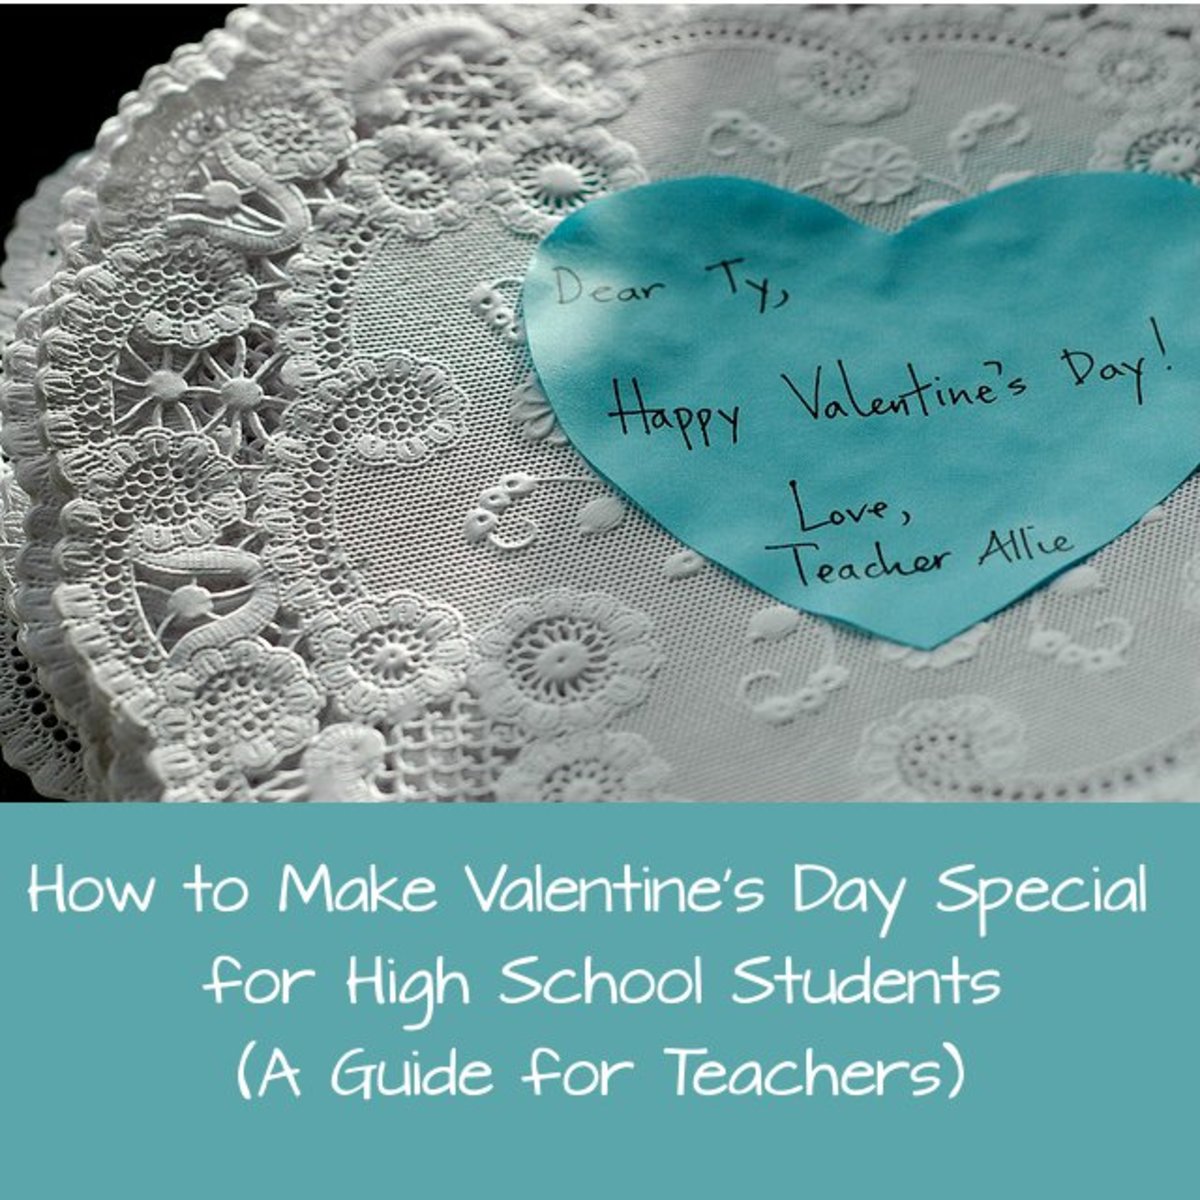 How to Make Valentine's Day Special for High School Students: Tips for Teachers